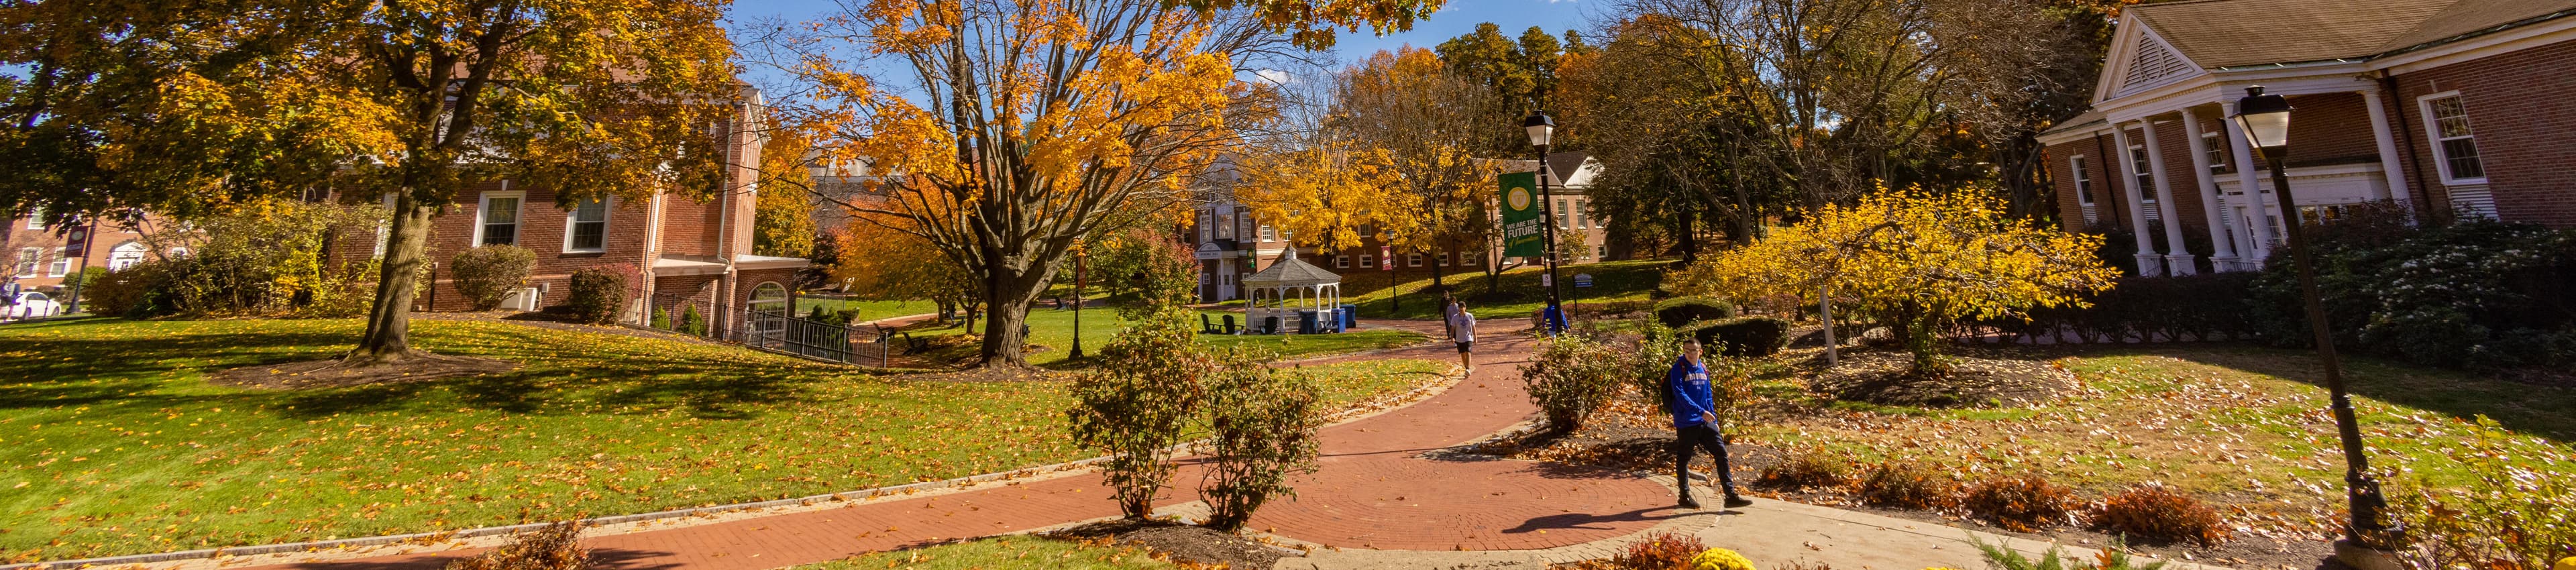 Campus in the fall 